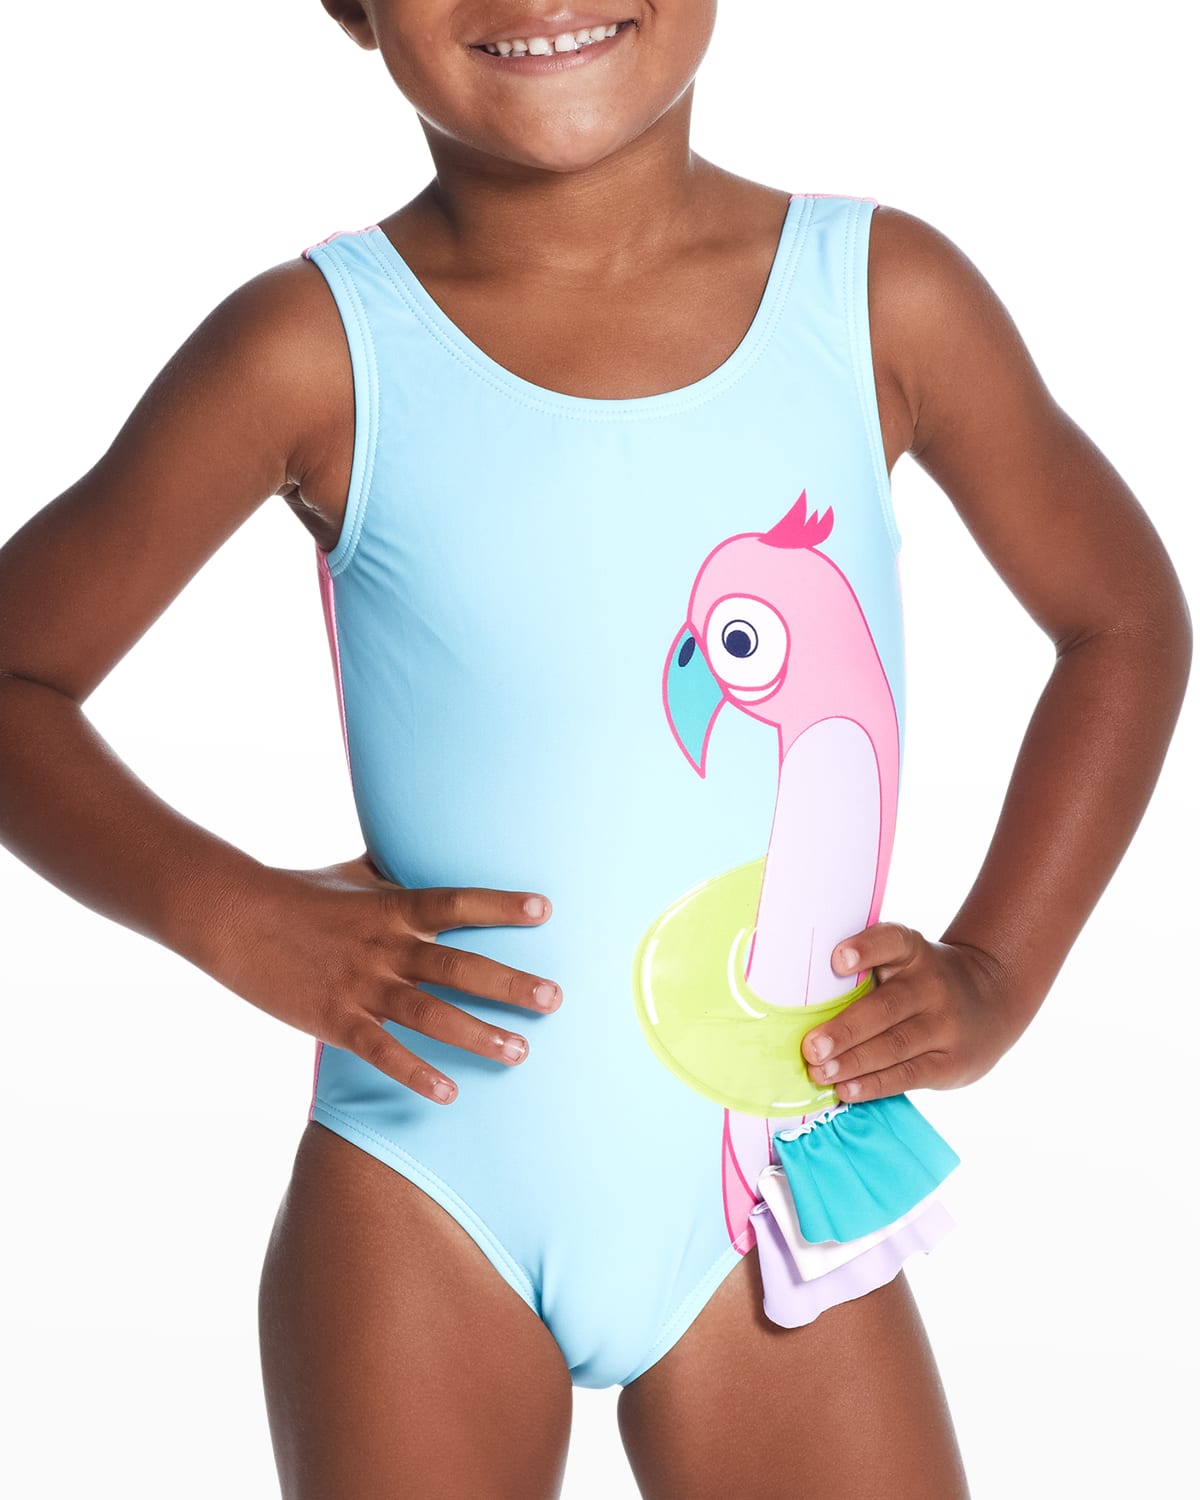 Swimsuit Girls One Piece Halter Colorful Sugar Printed Kids Bathing Suit Multicolor